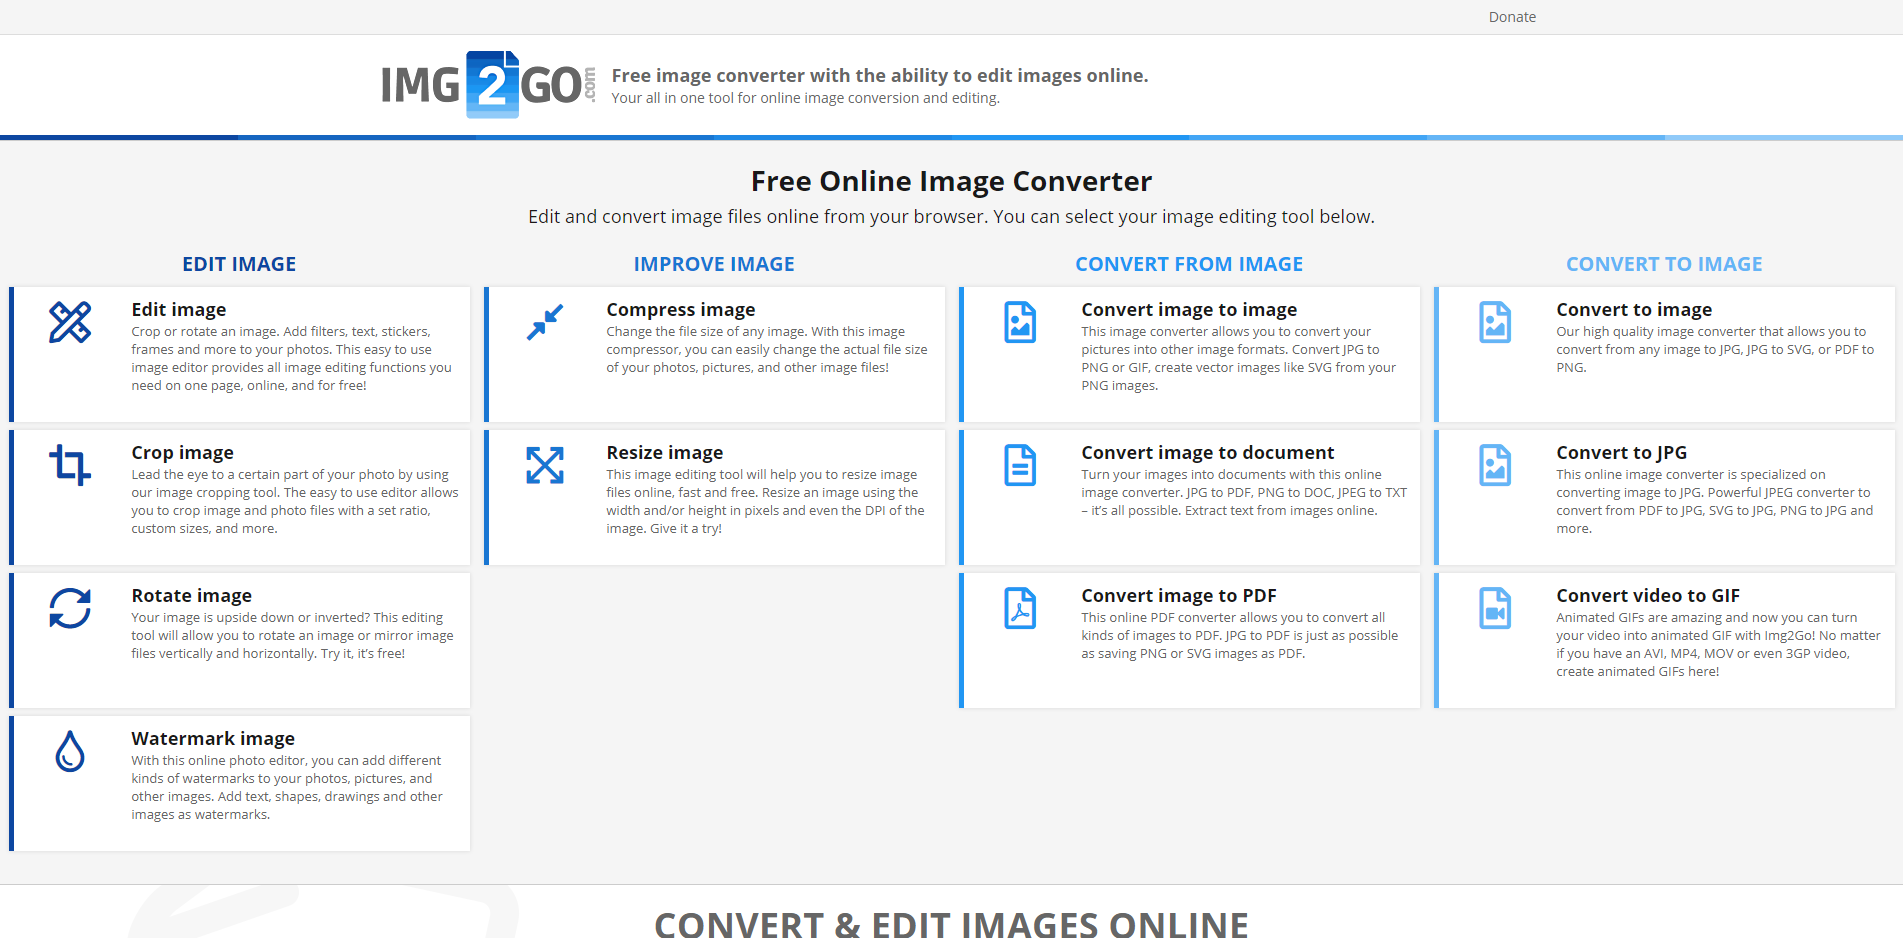 Convert to JPG - Convert images, documents and videos to JPG